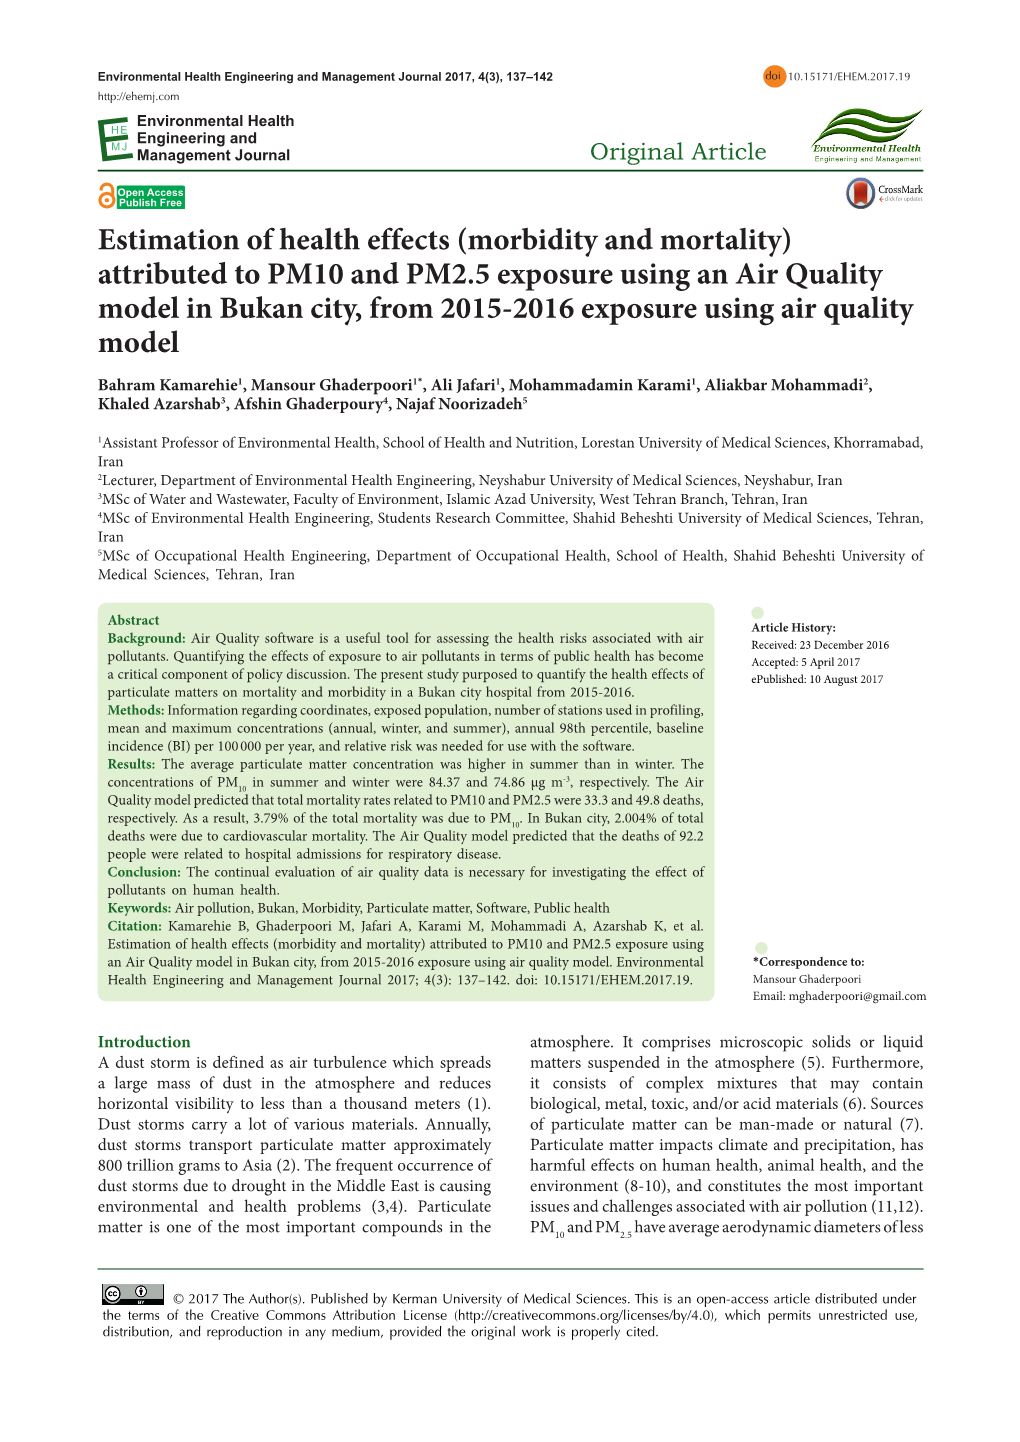 Estimation of Health Effects (Morbidity and Mortality) Attributed to PM10